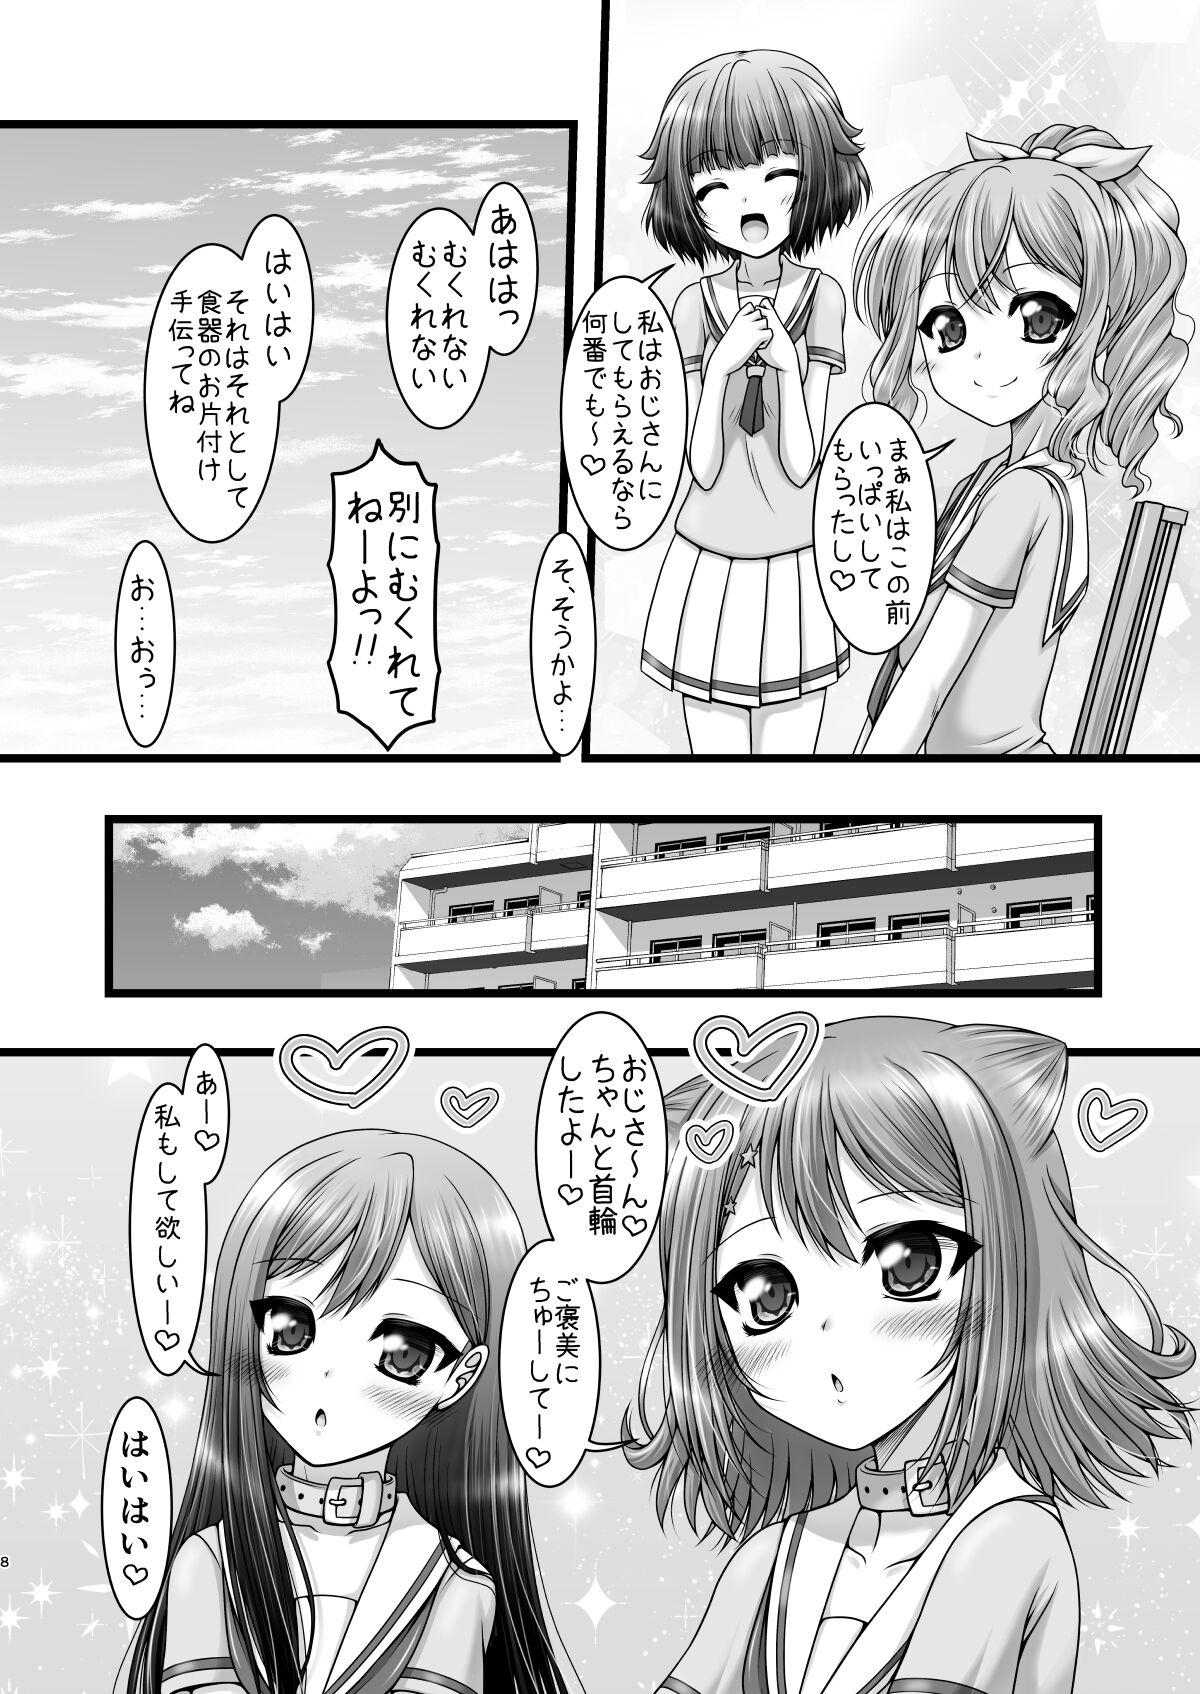 Massage Creep Twinkle Express - Bang dream Trimmed - Page 7